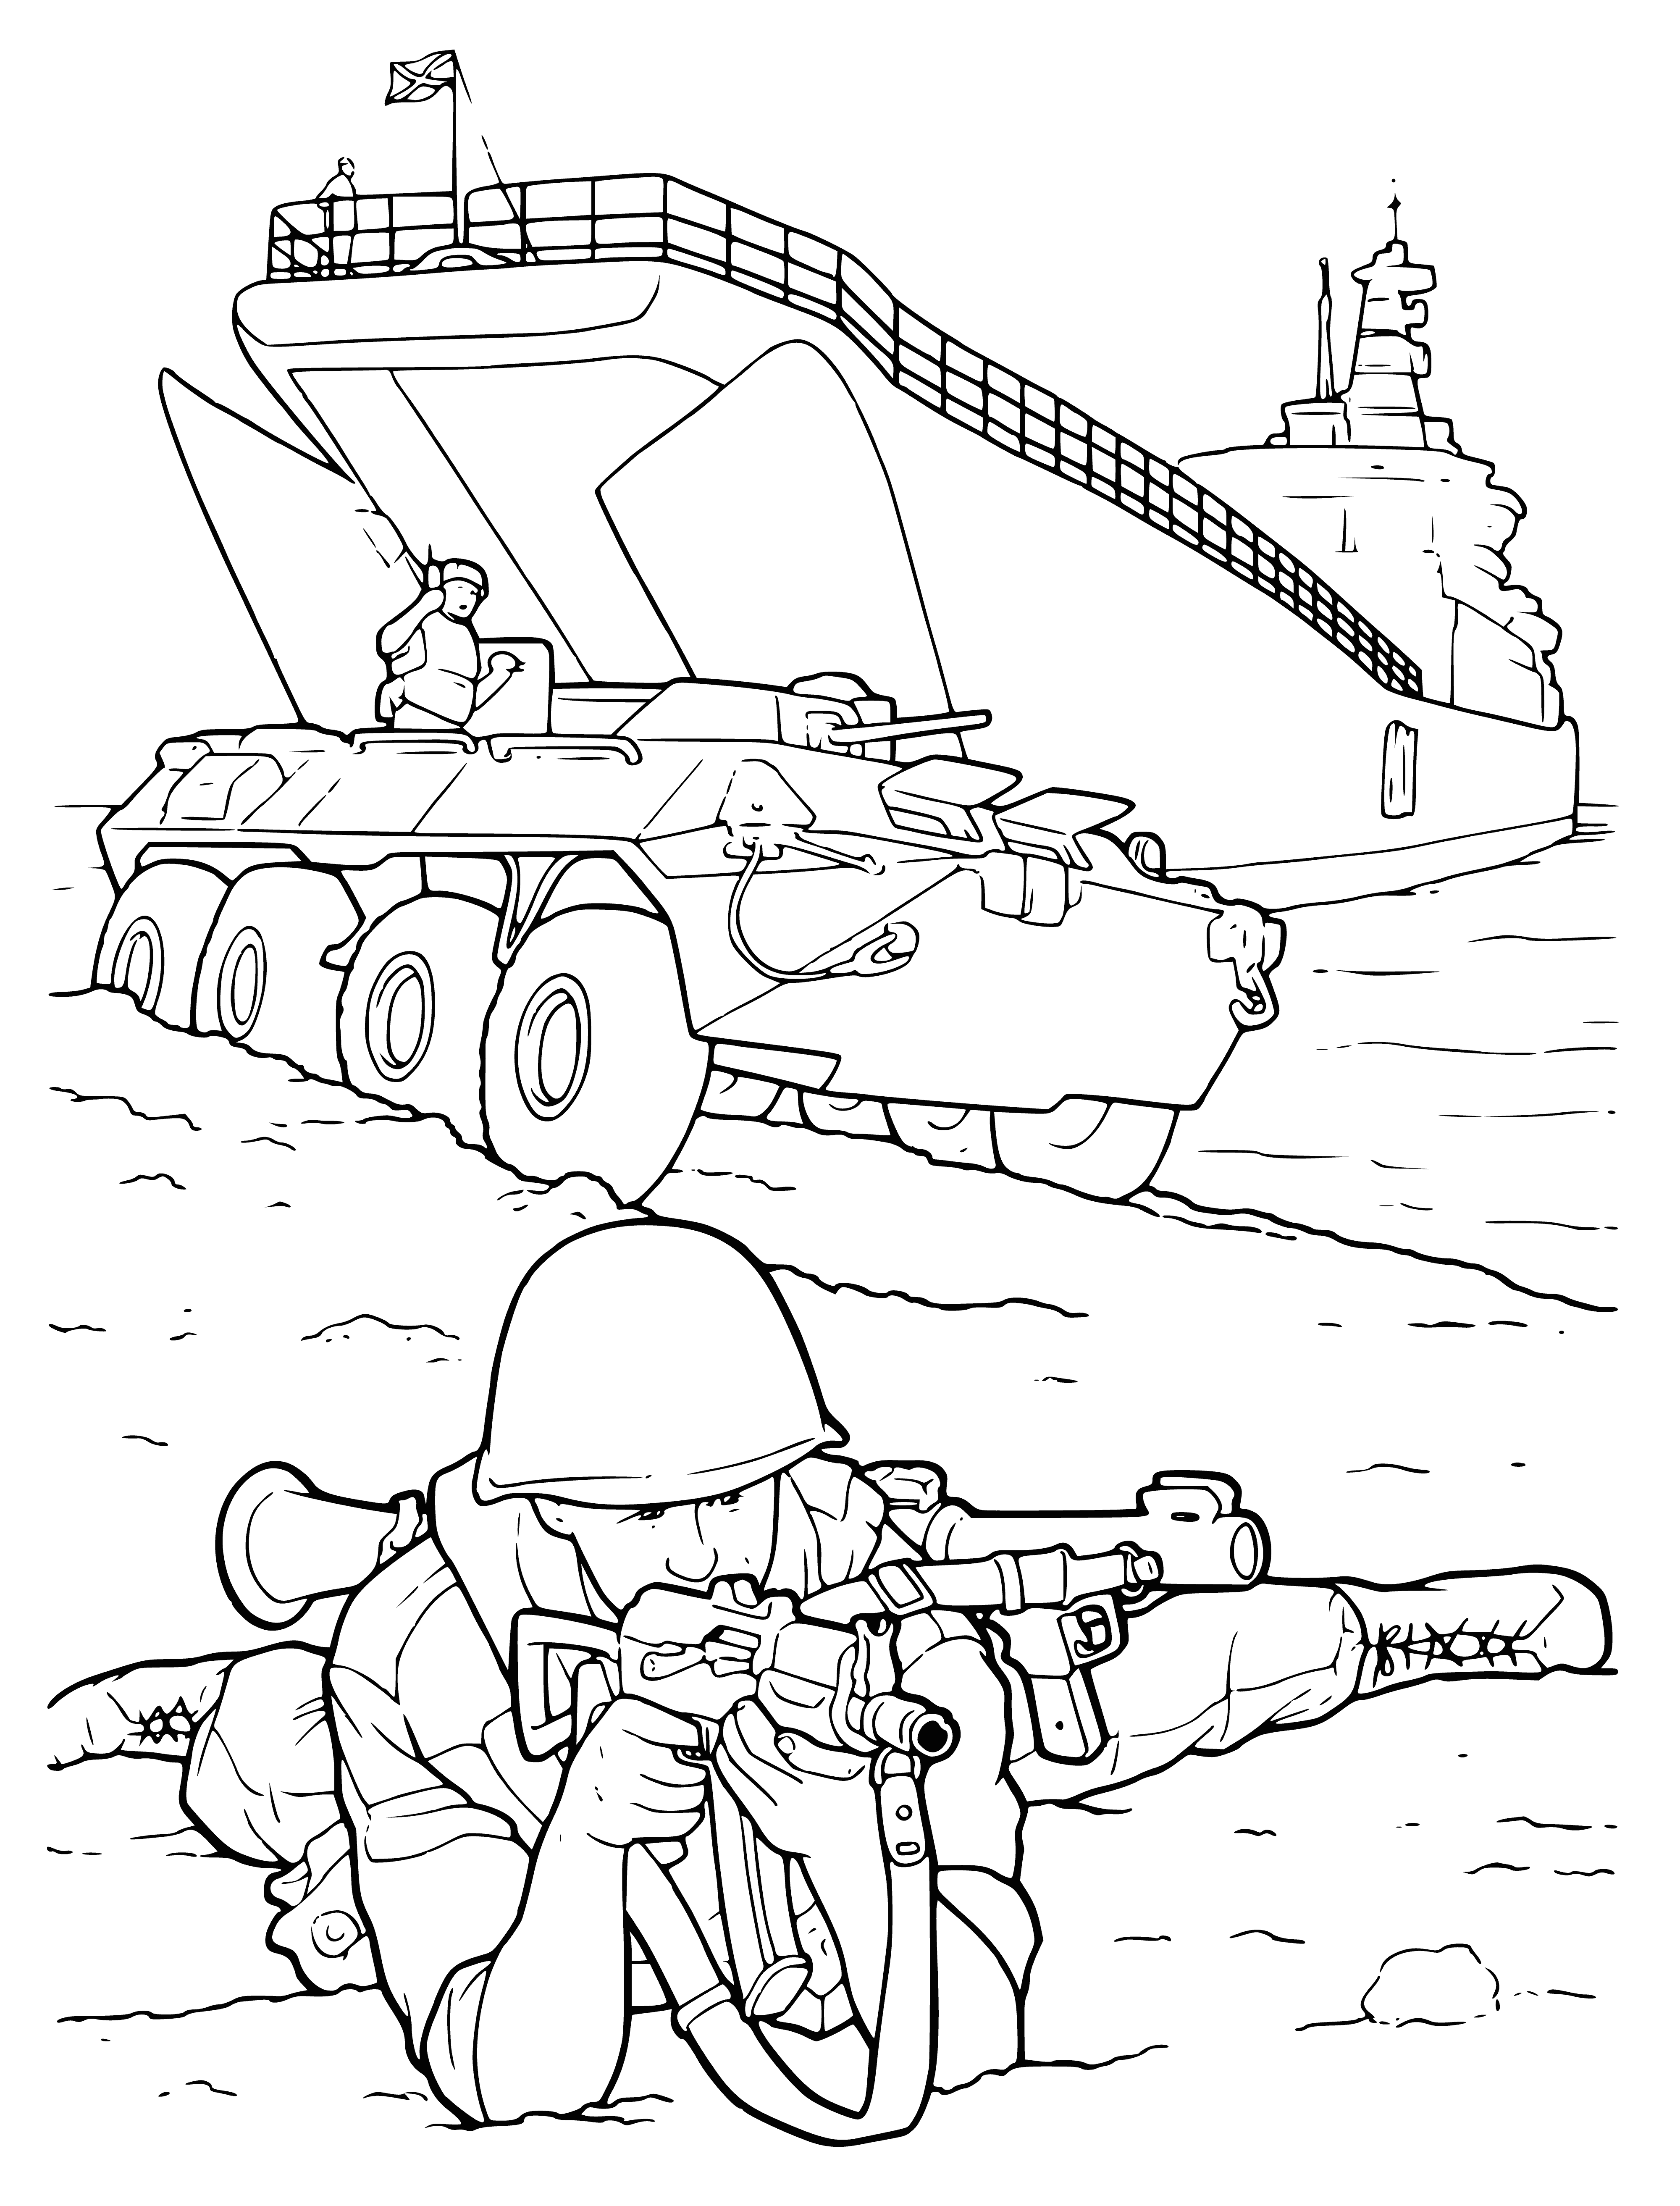 coloring page: The page includes items associated with Russian military symbolism such as a red star.

Russian Army soldier saluting in uniform, w/ items associated with military symbolism such as the red star.